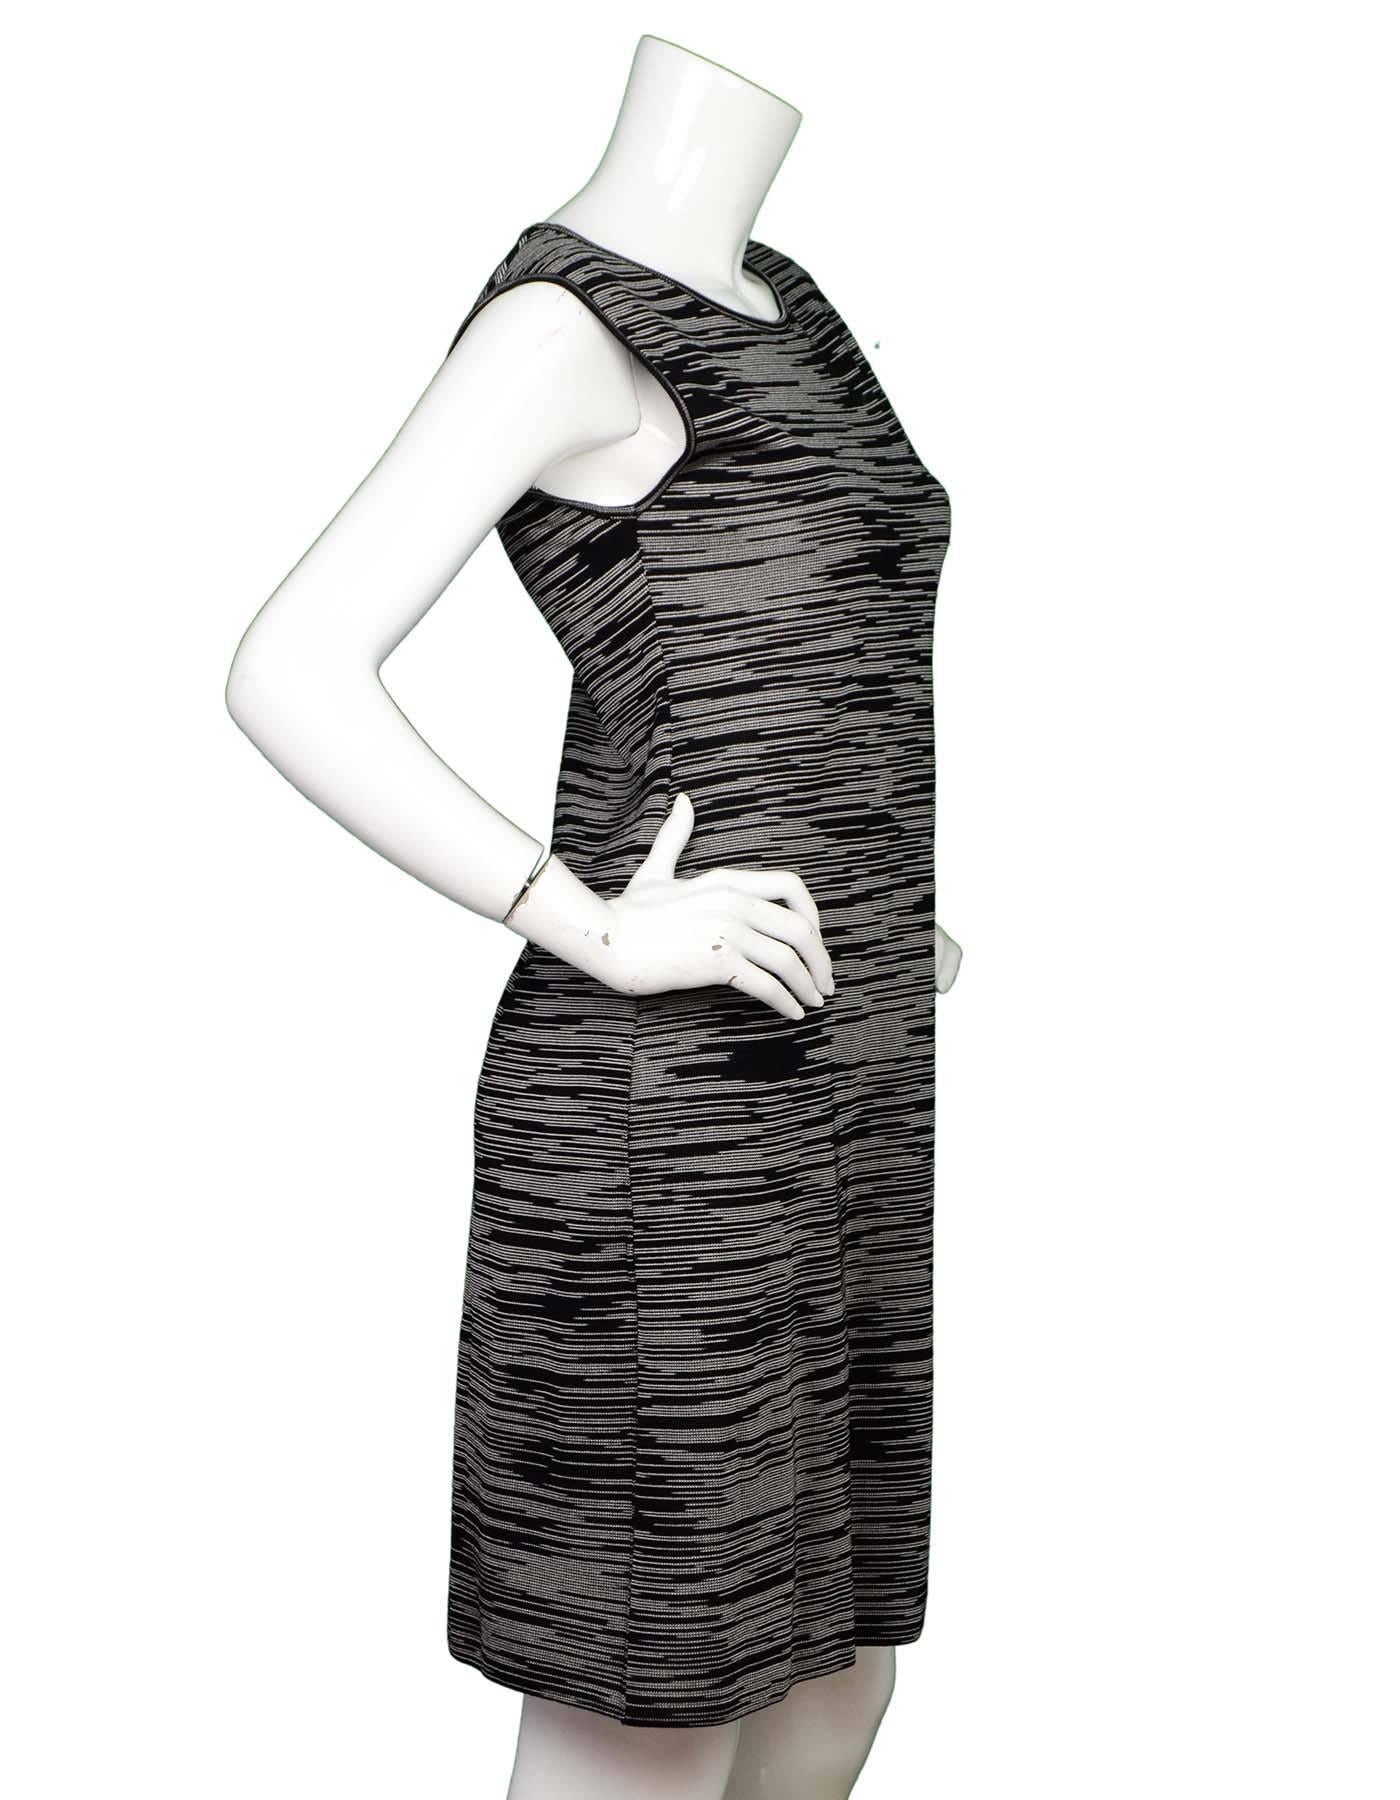 M Missoni Black and White Sleeveless Dress Sz 46

Made In: Italy
Color: Black and white
Composition: Not listed
Lining: None
Closure/Opening: Pull over
Exterior Pockets: None
Interior Pockets: None
Overall Condition: Excellent pre-owned